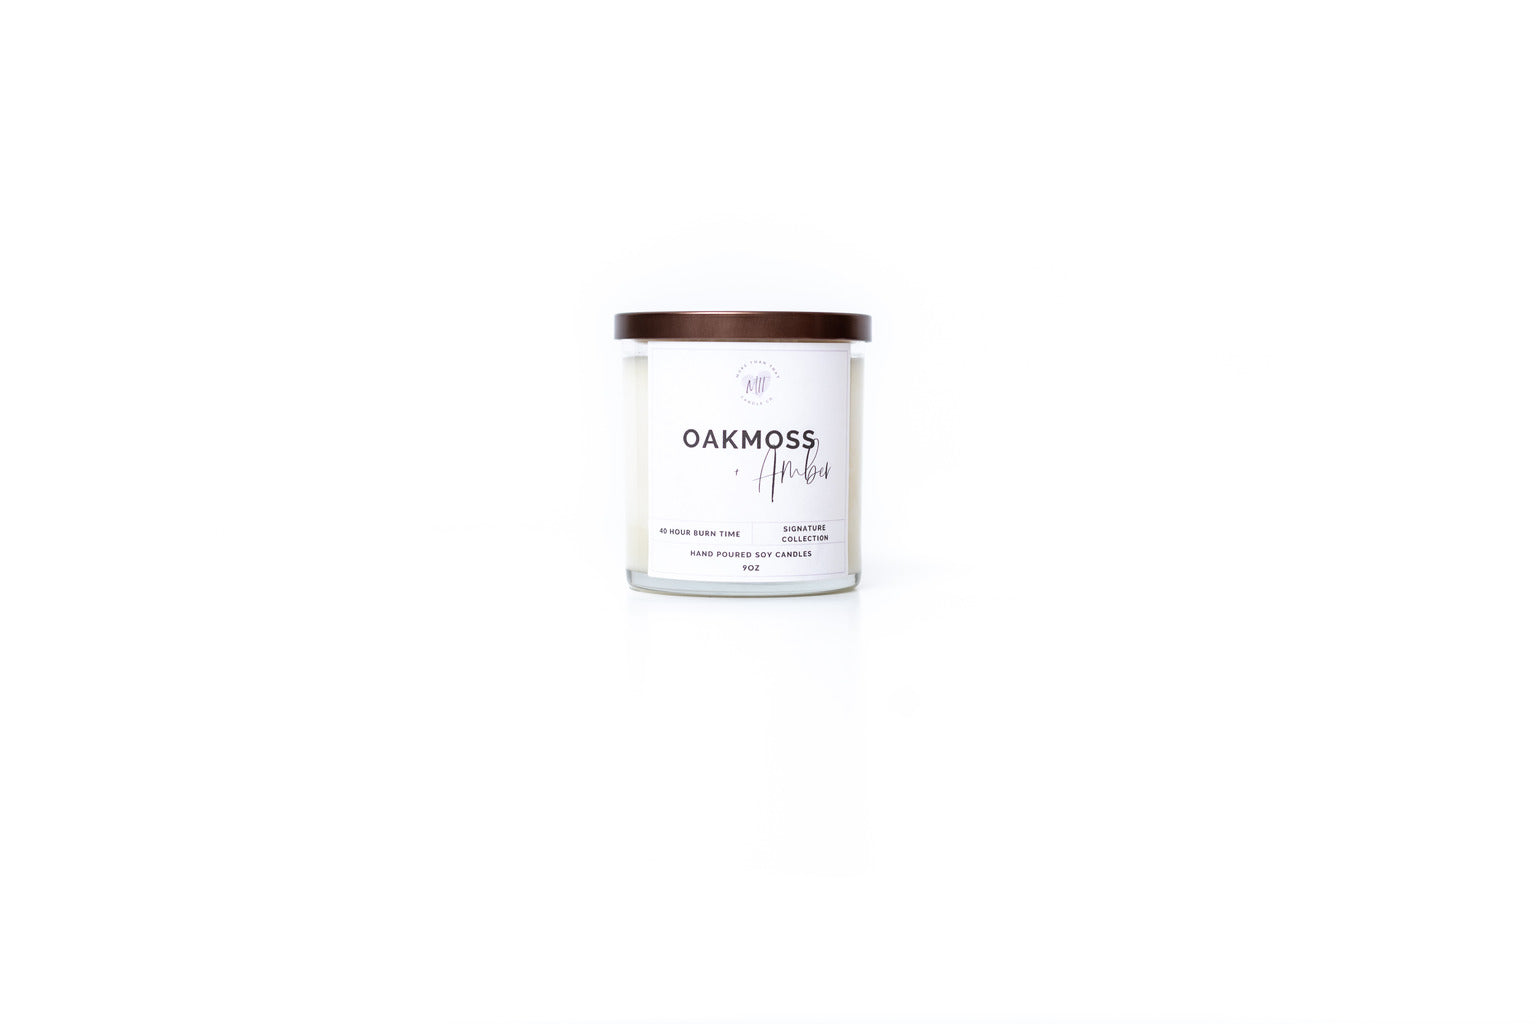 Purveyors of Fragrance Oakmoss and Amber Scented Jar Candle